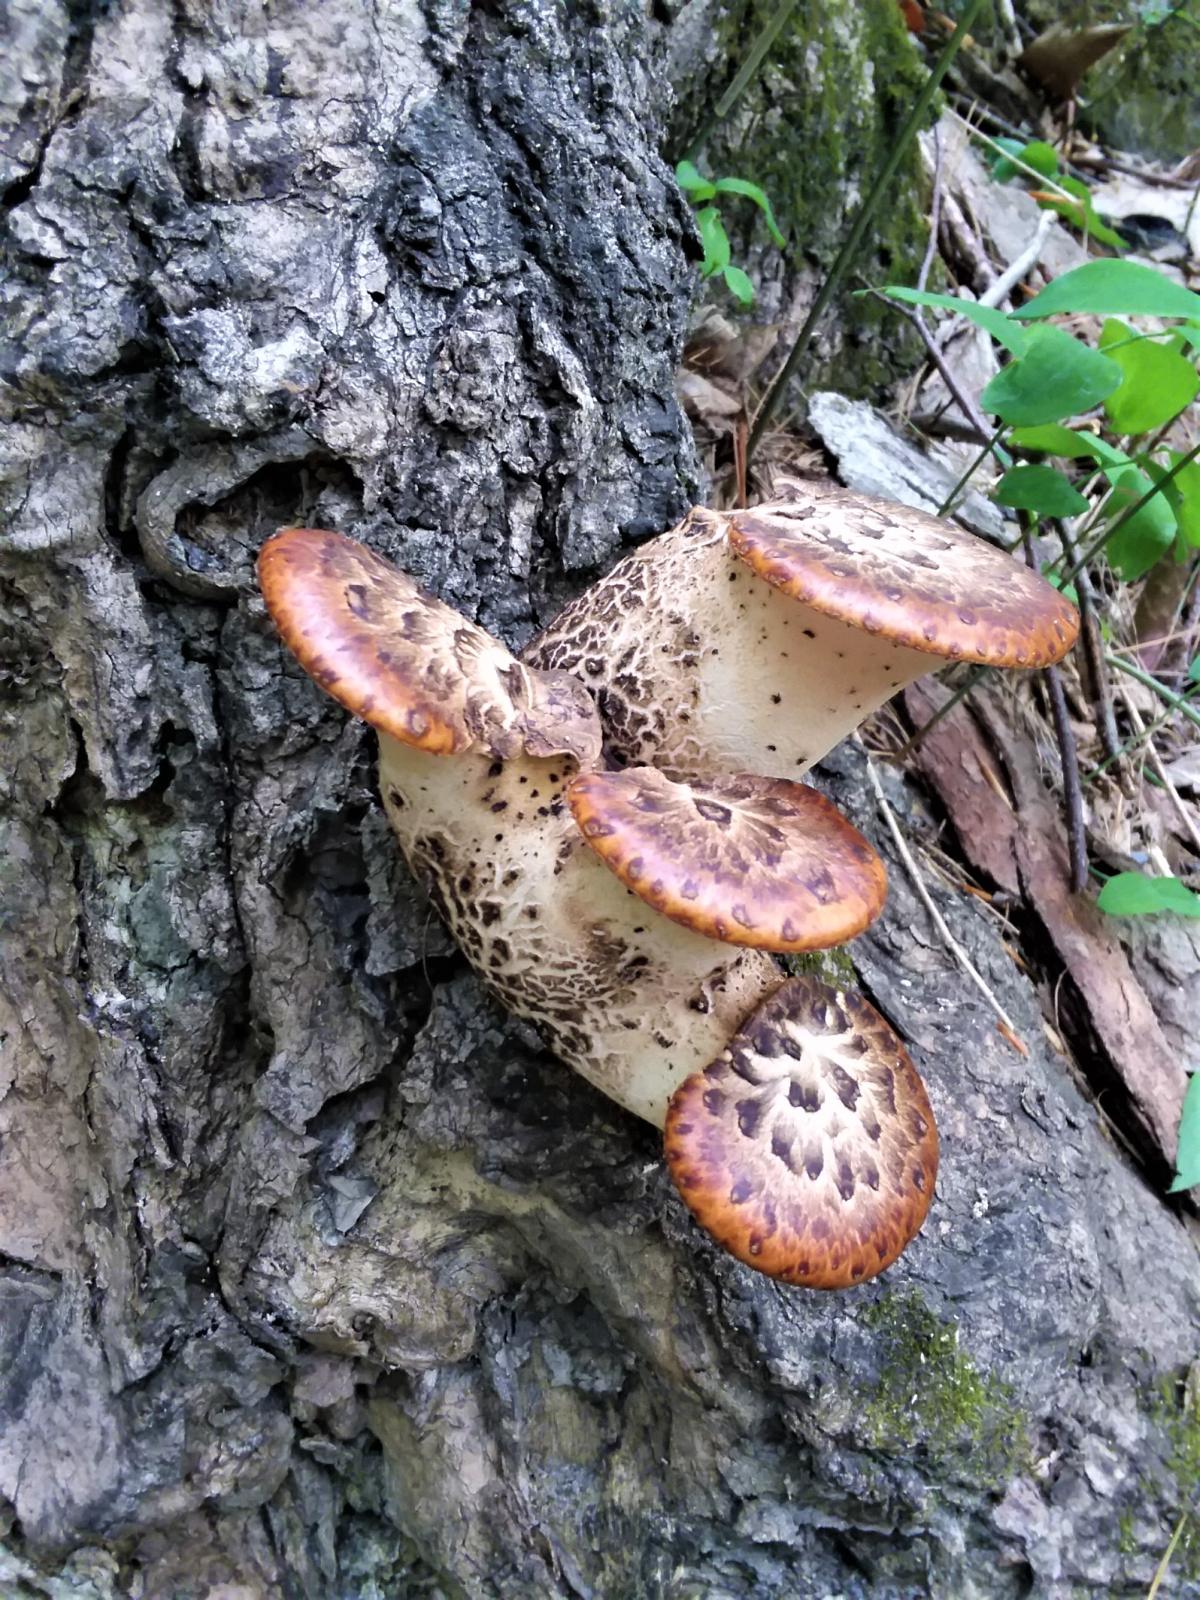 Young dryad saddle mushroom, four "heads" from one base